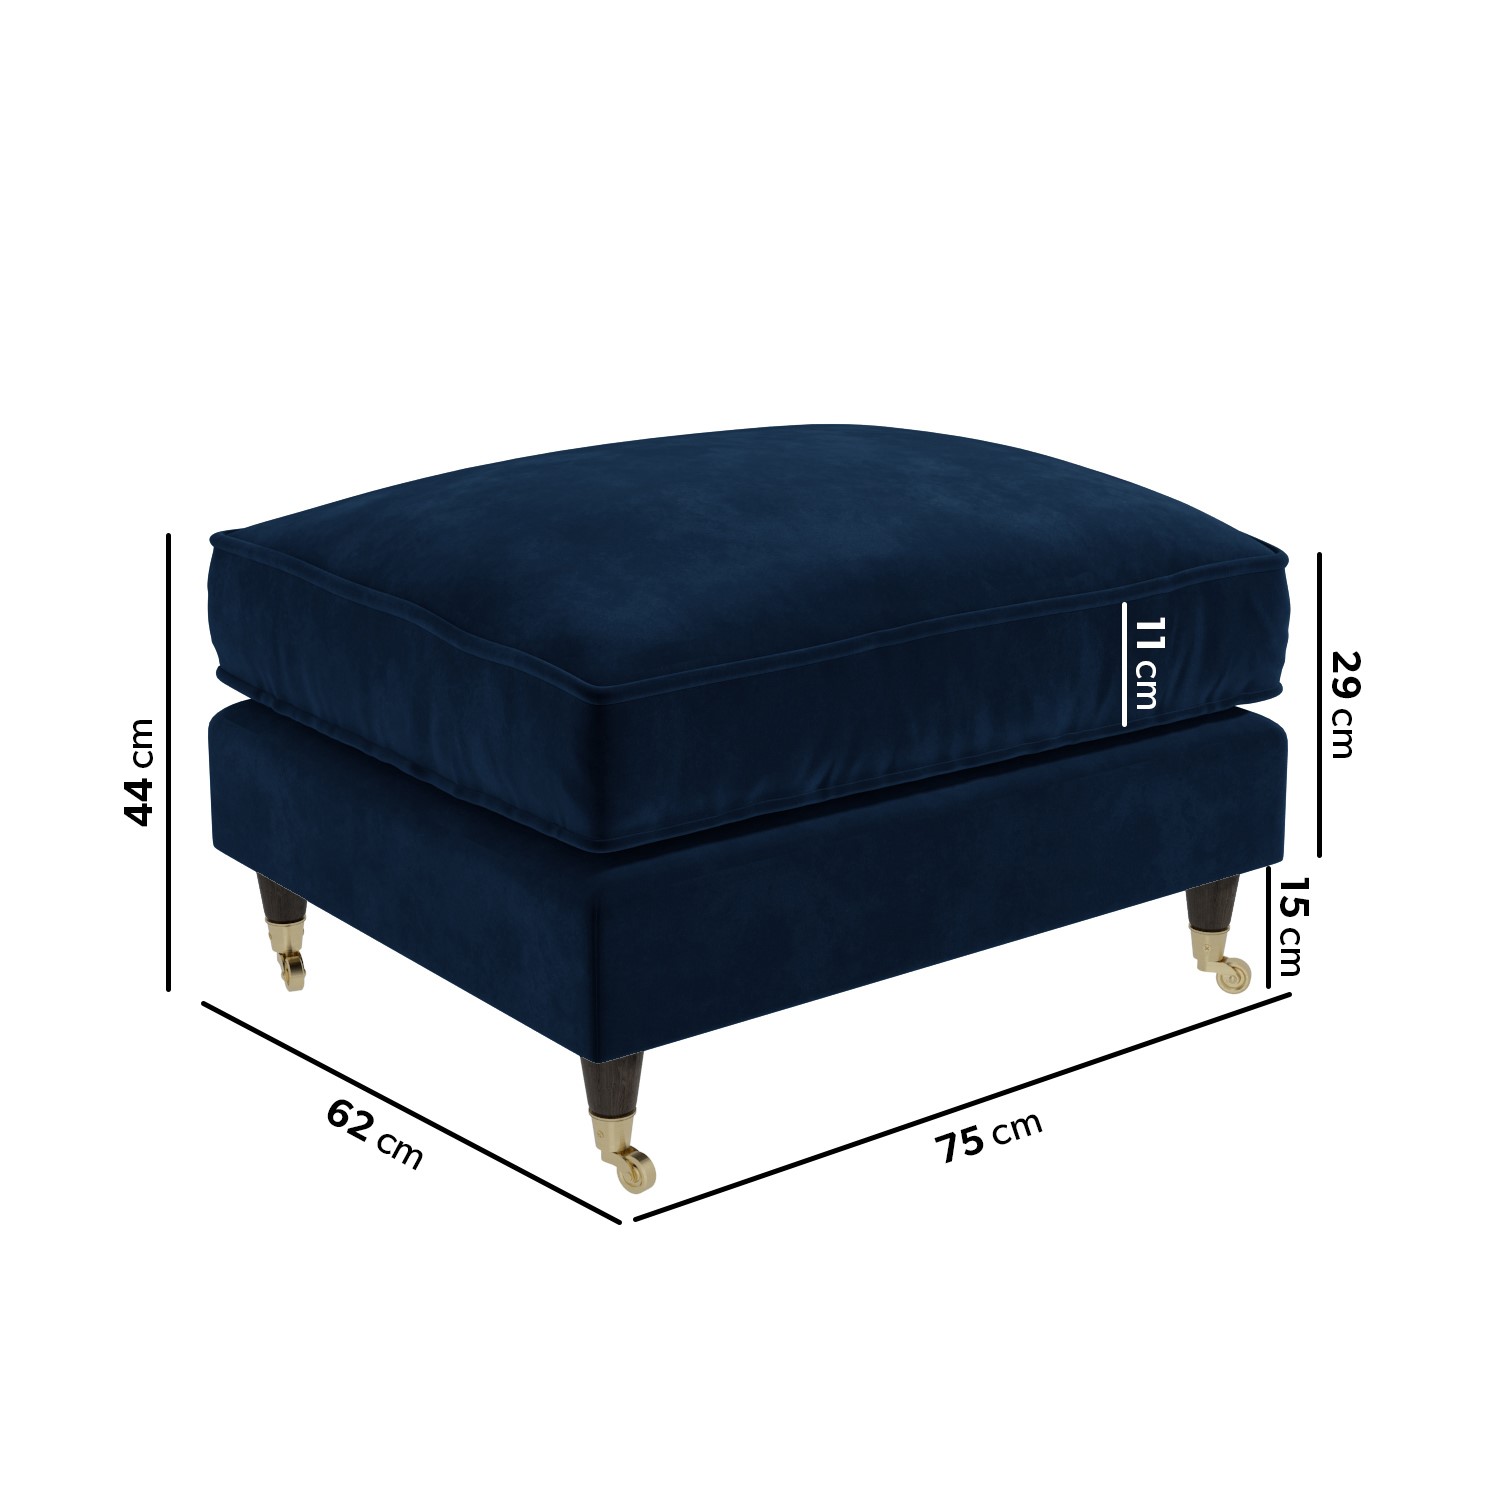 Read more about Navy velvet footstool payton